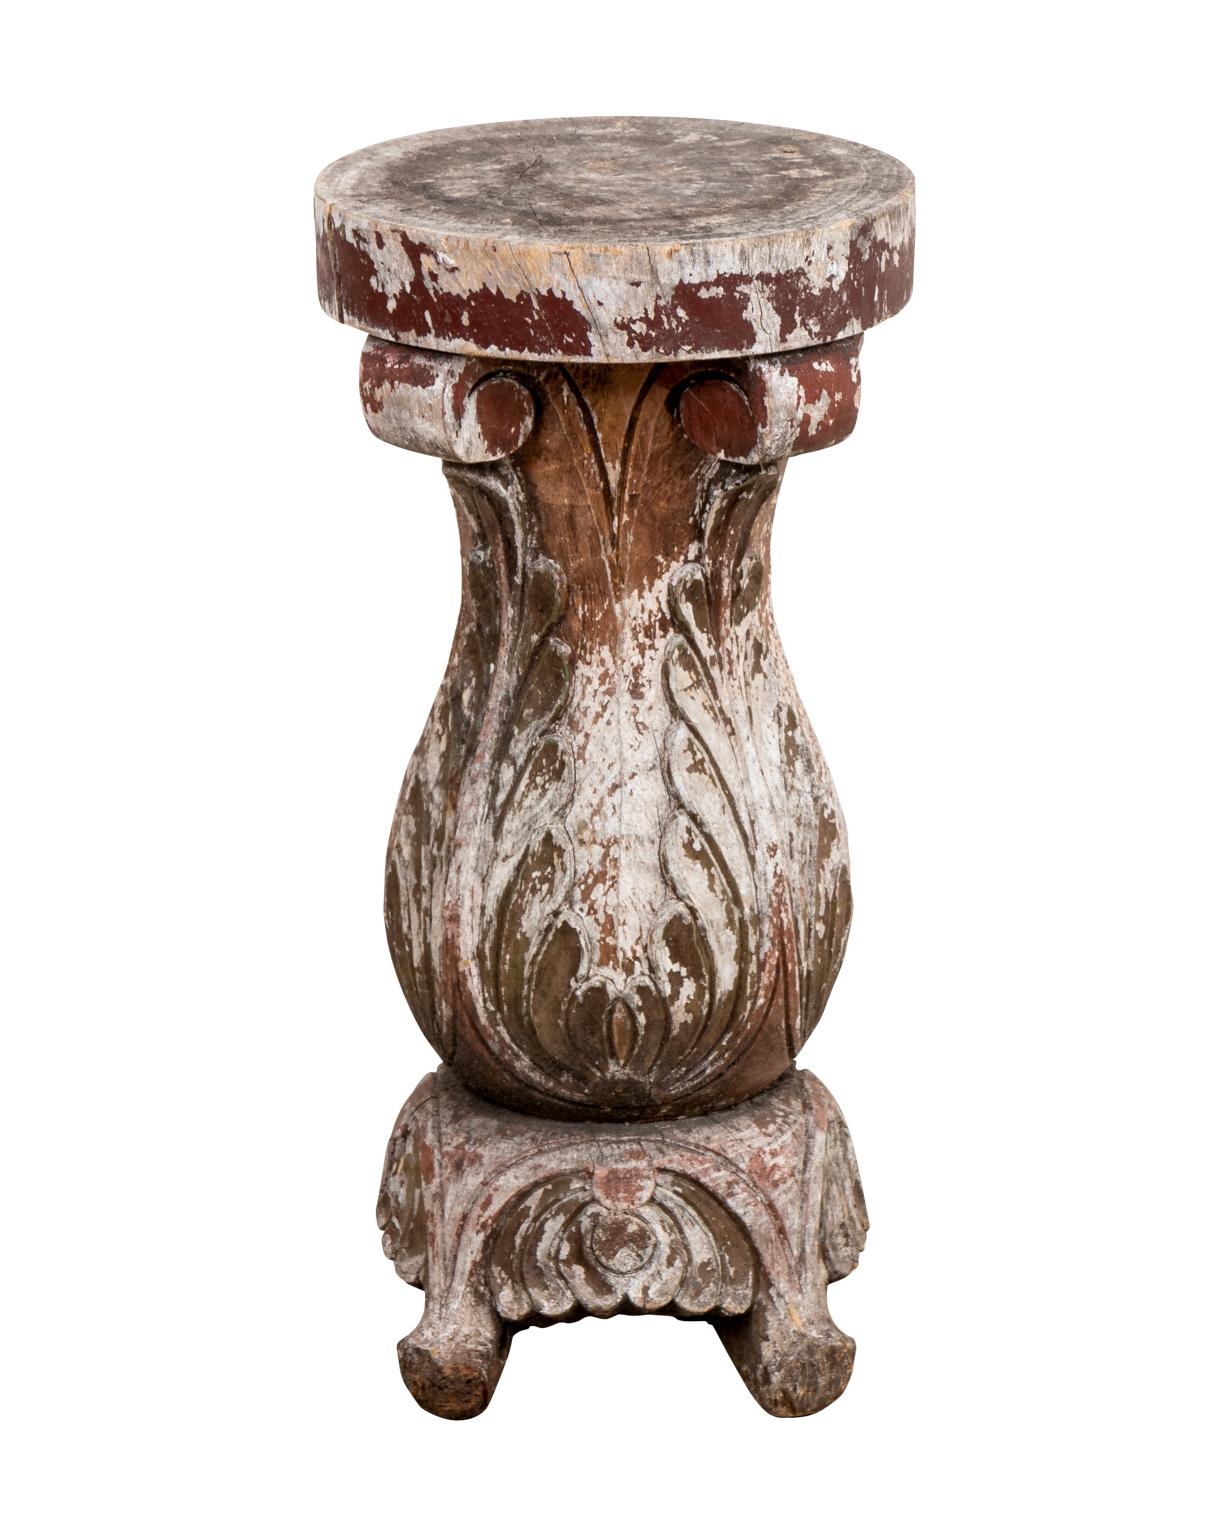 Set of three small side tables in the Hollywood Regency style made from repurposed carved wood architectural fragments in the forms of Corinthian columns and vase shaped baulisters with scrolled foliage. The tables are ornately carved and exhibit